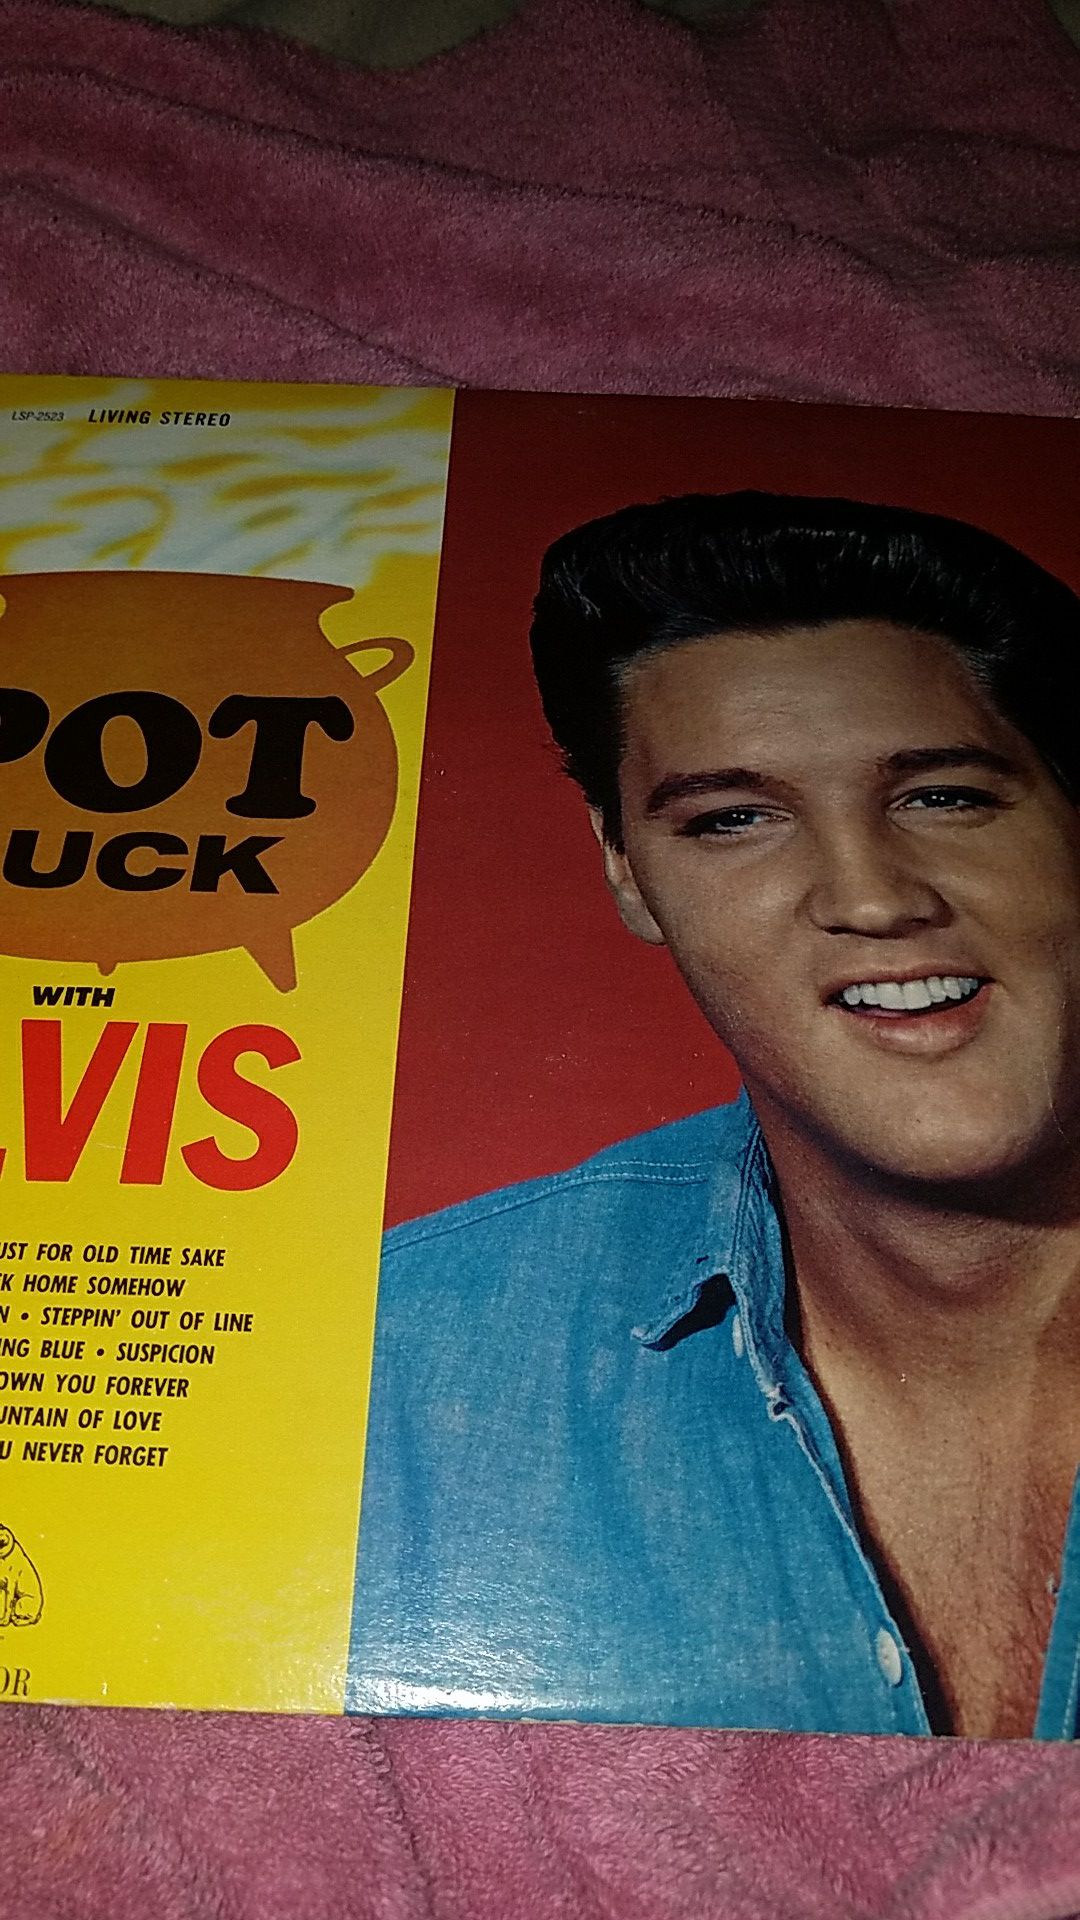 POT LUCK WITH ELVIS